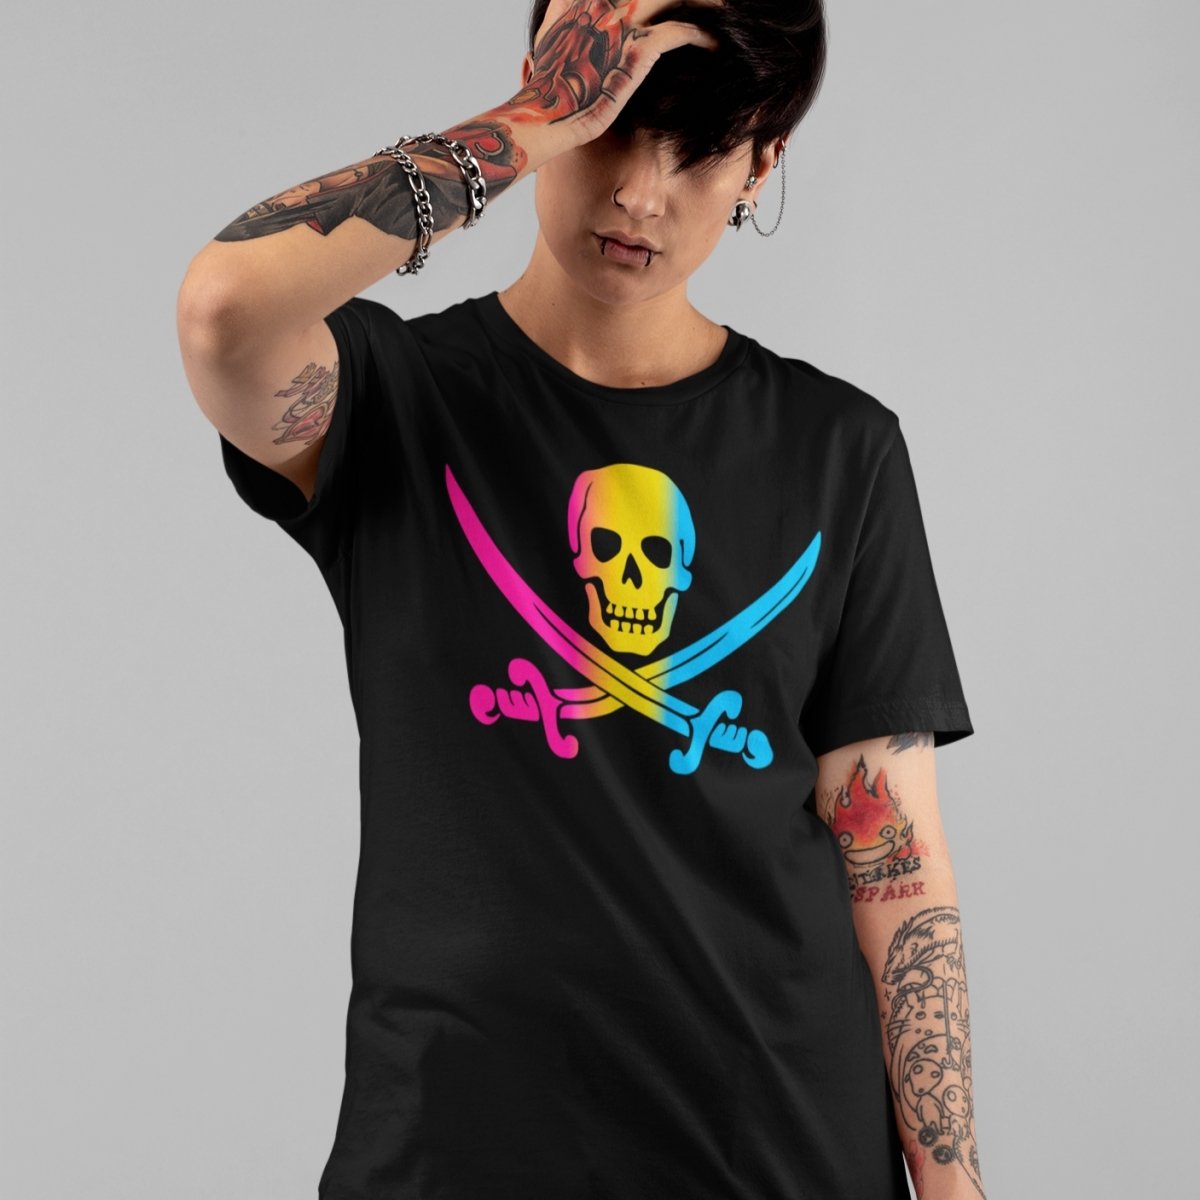 Pansexual Pirate Shirt - On Trend Shirts